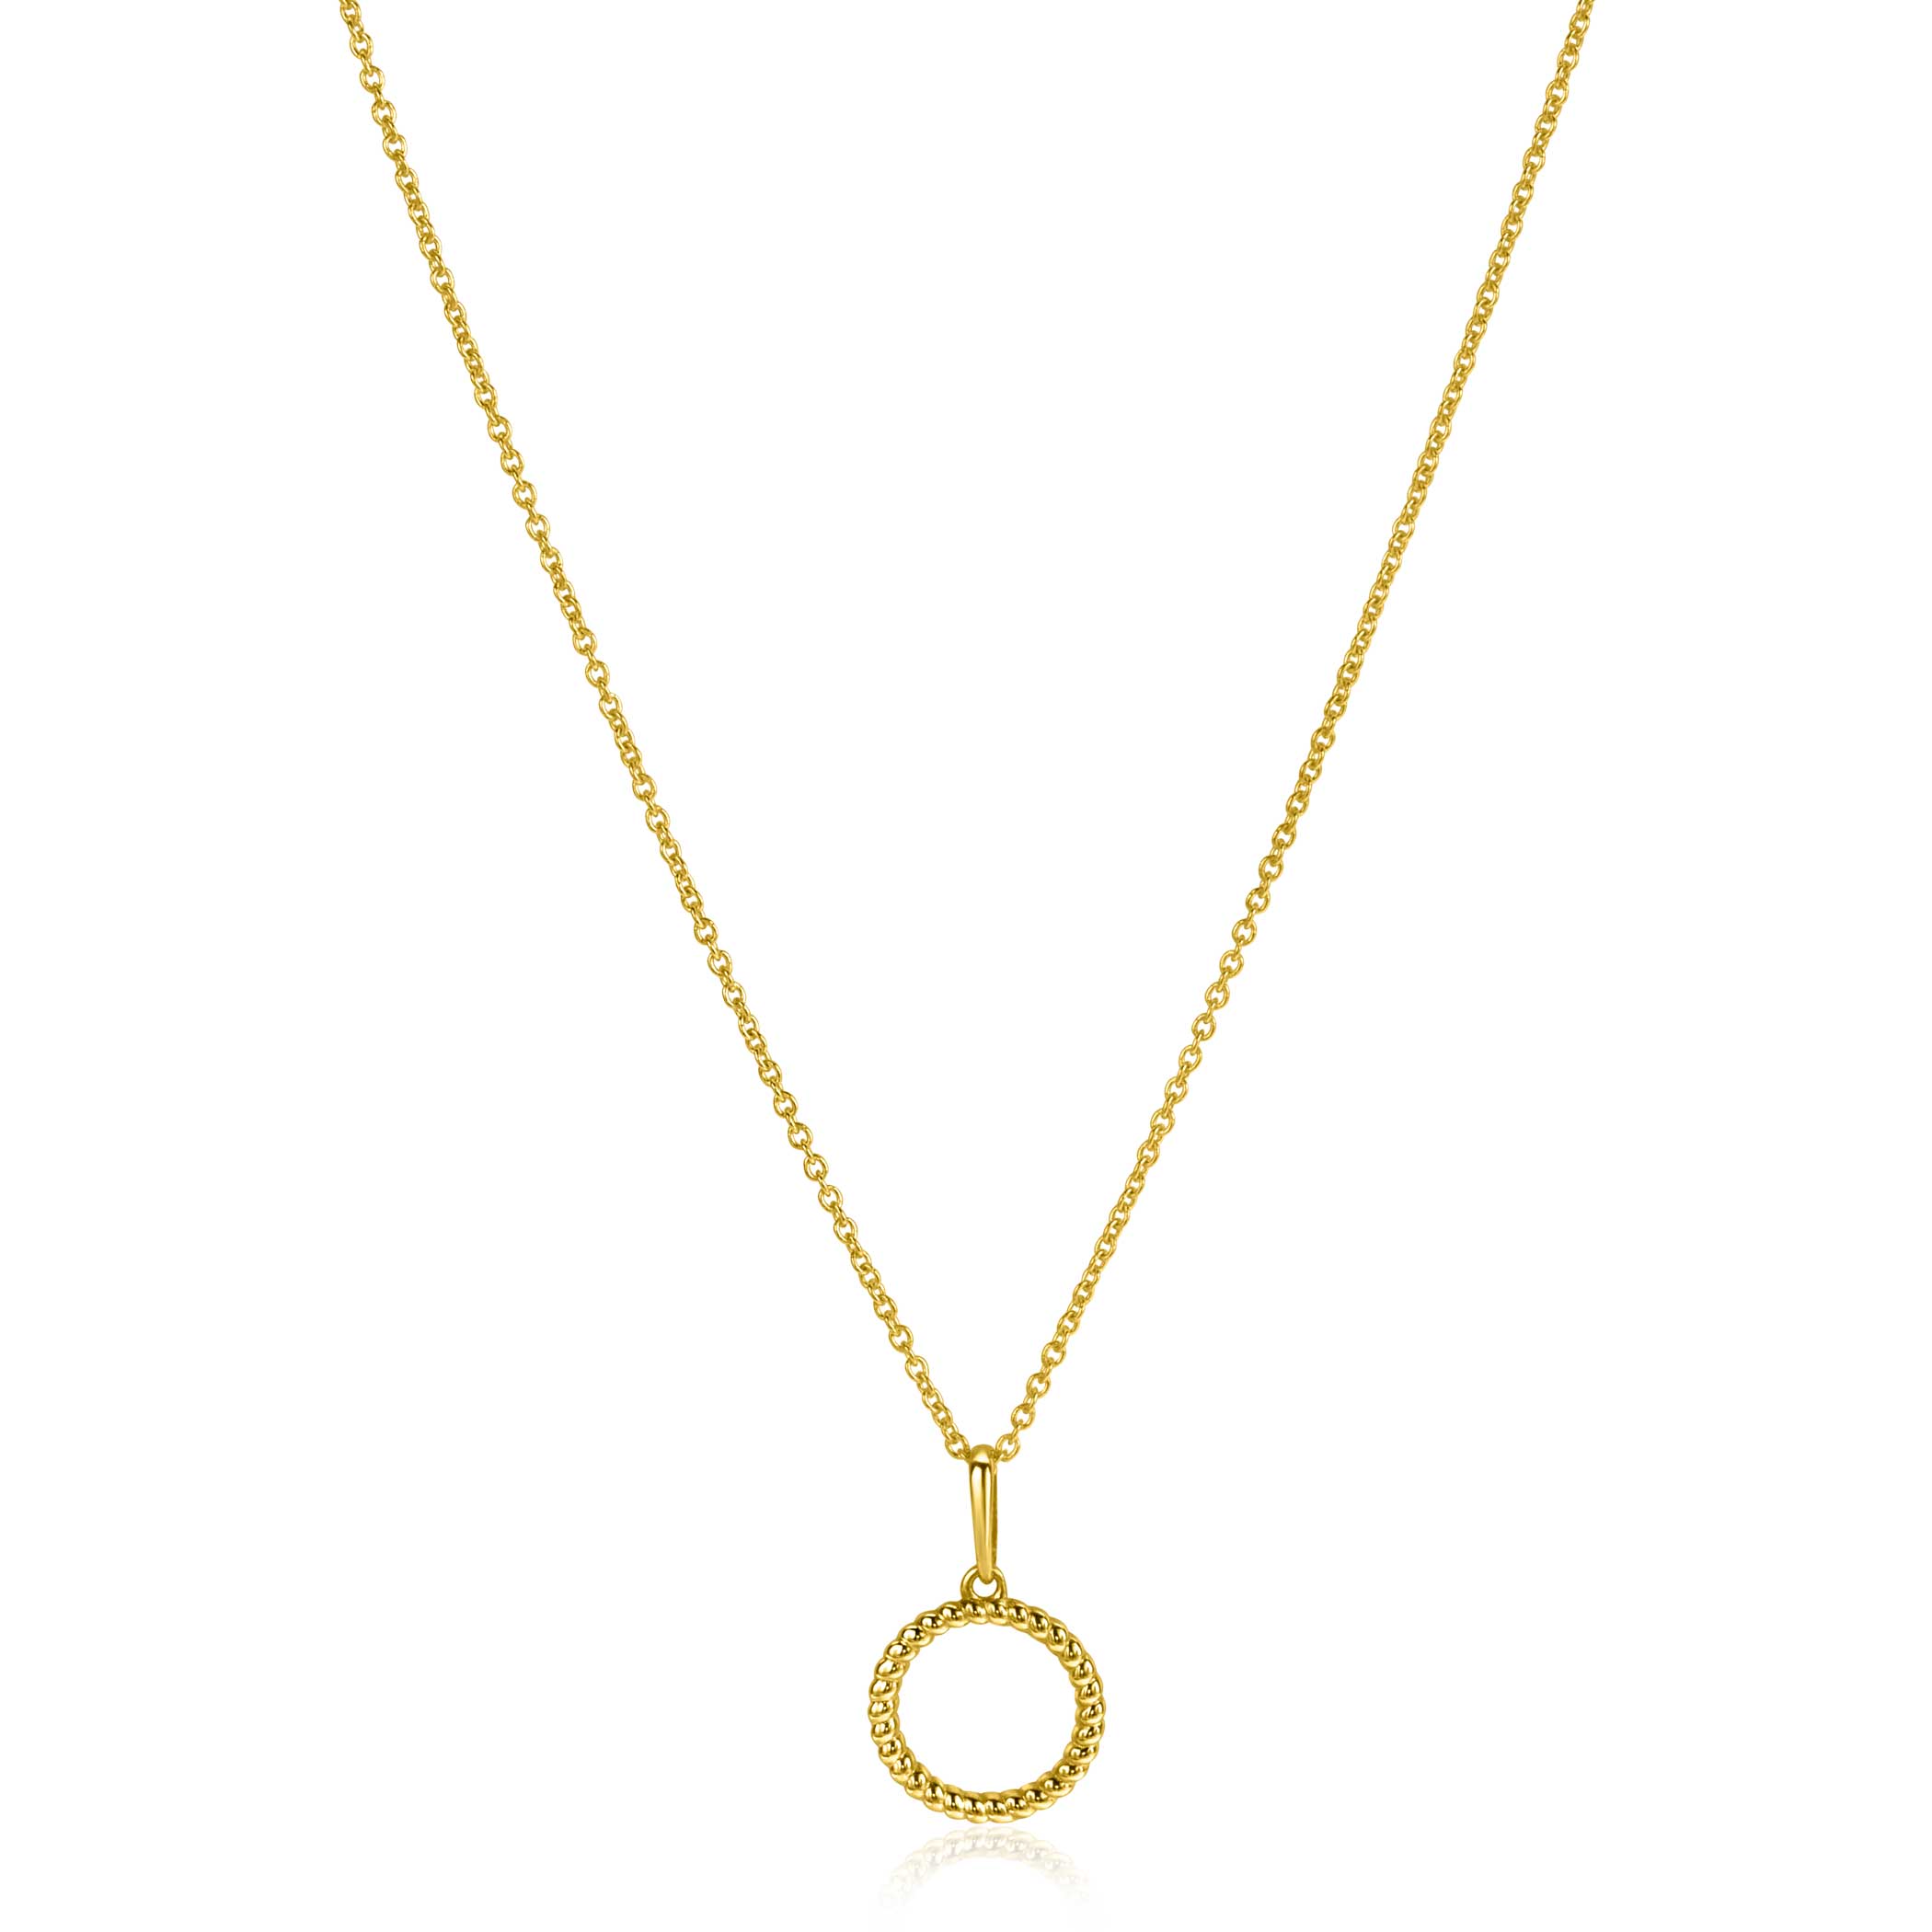 10mm ZINZI 14K Gold Pendant Open Circle Twist ZGH400 (excl. necklace)